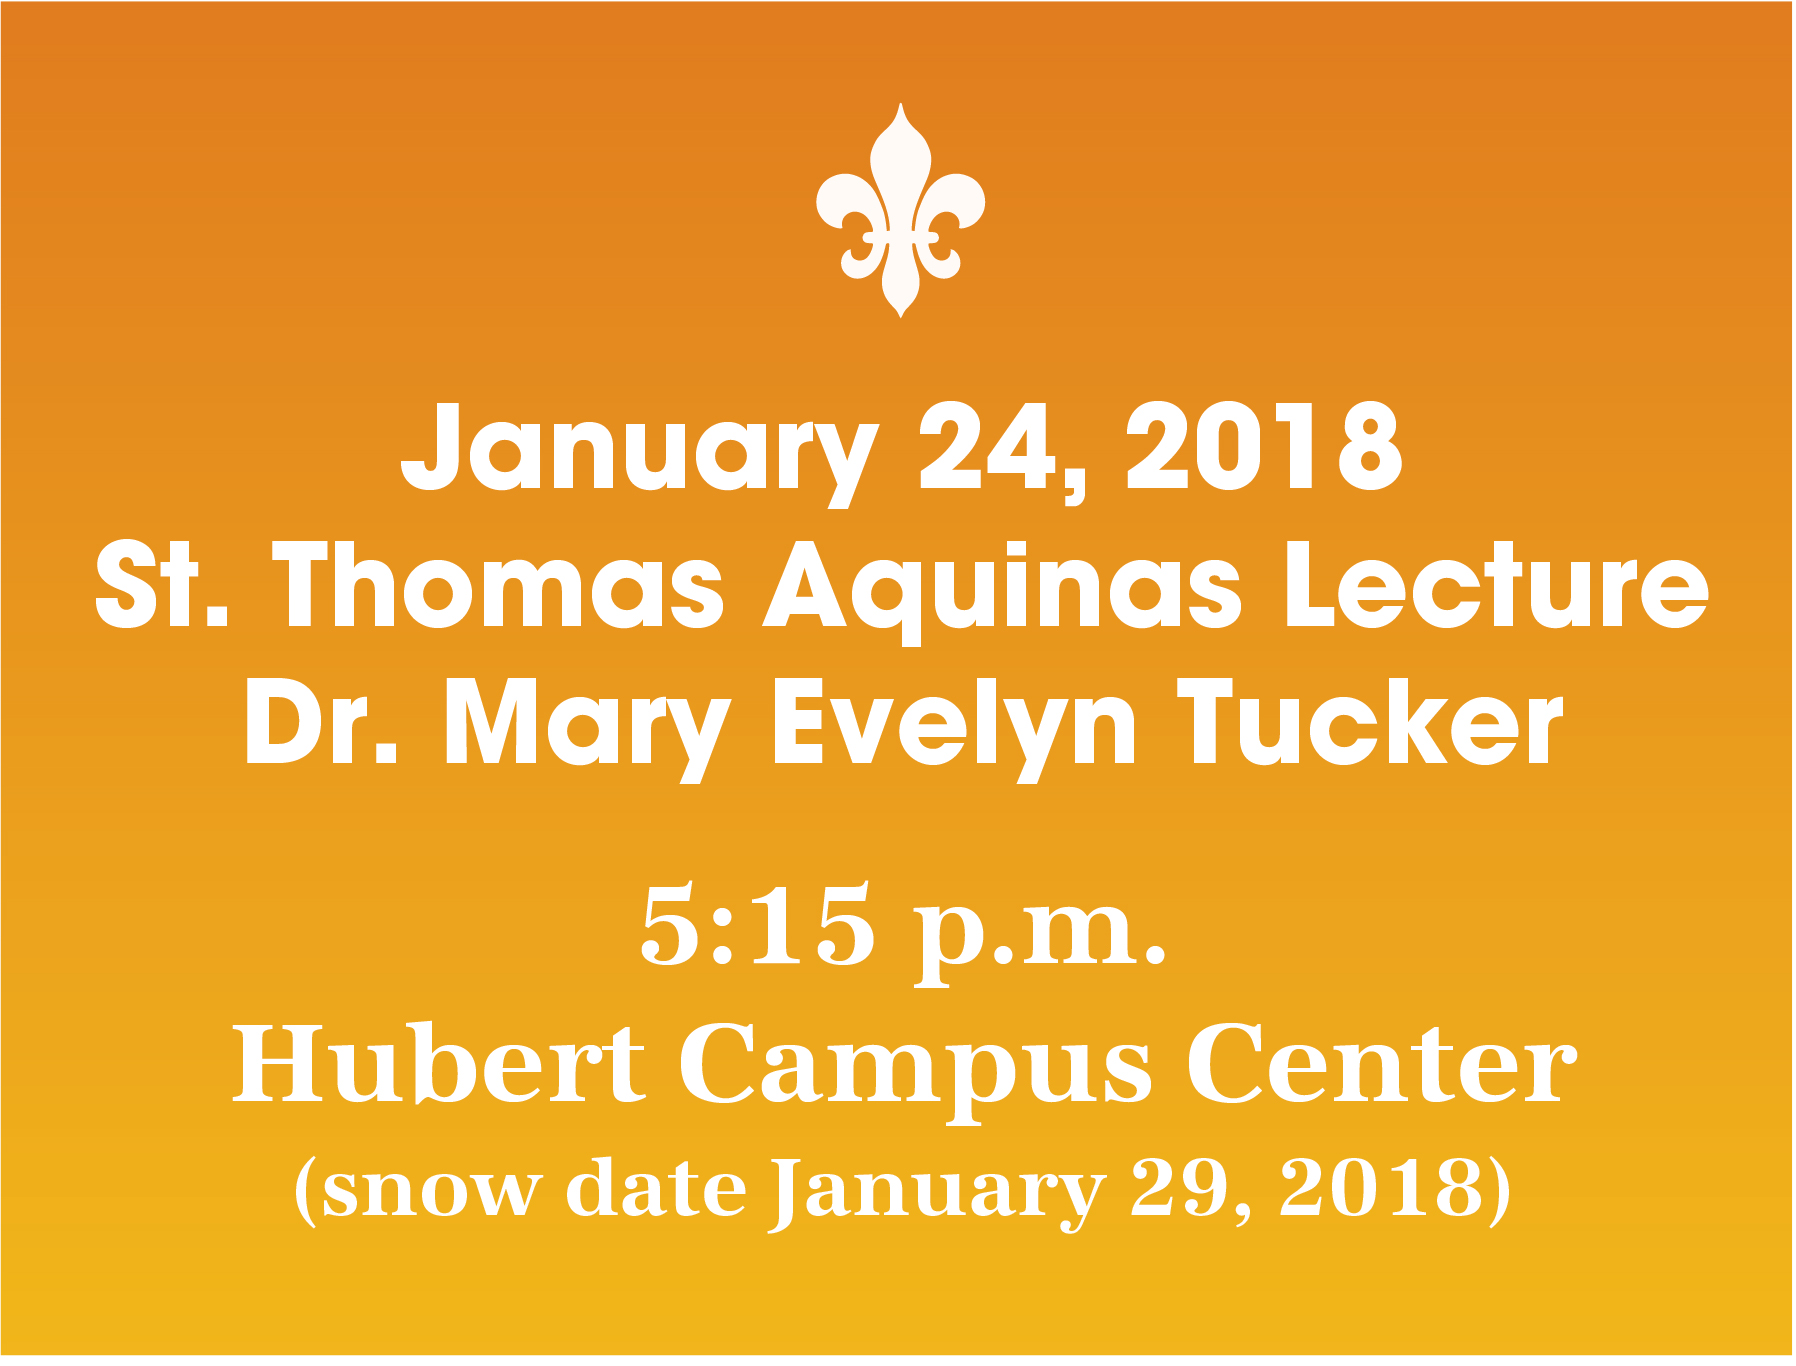 St. Thomas Aquinas Lecture Dr. Mary Evelyn Tucker